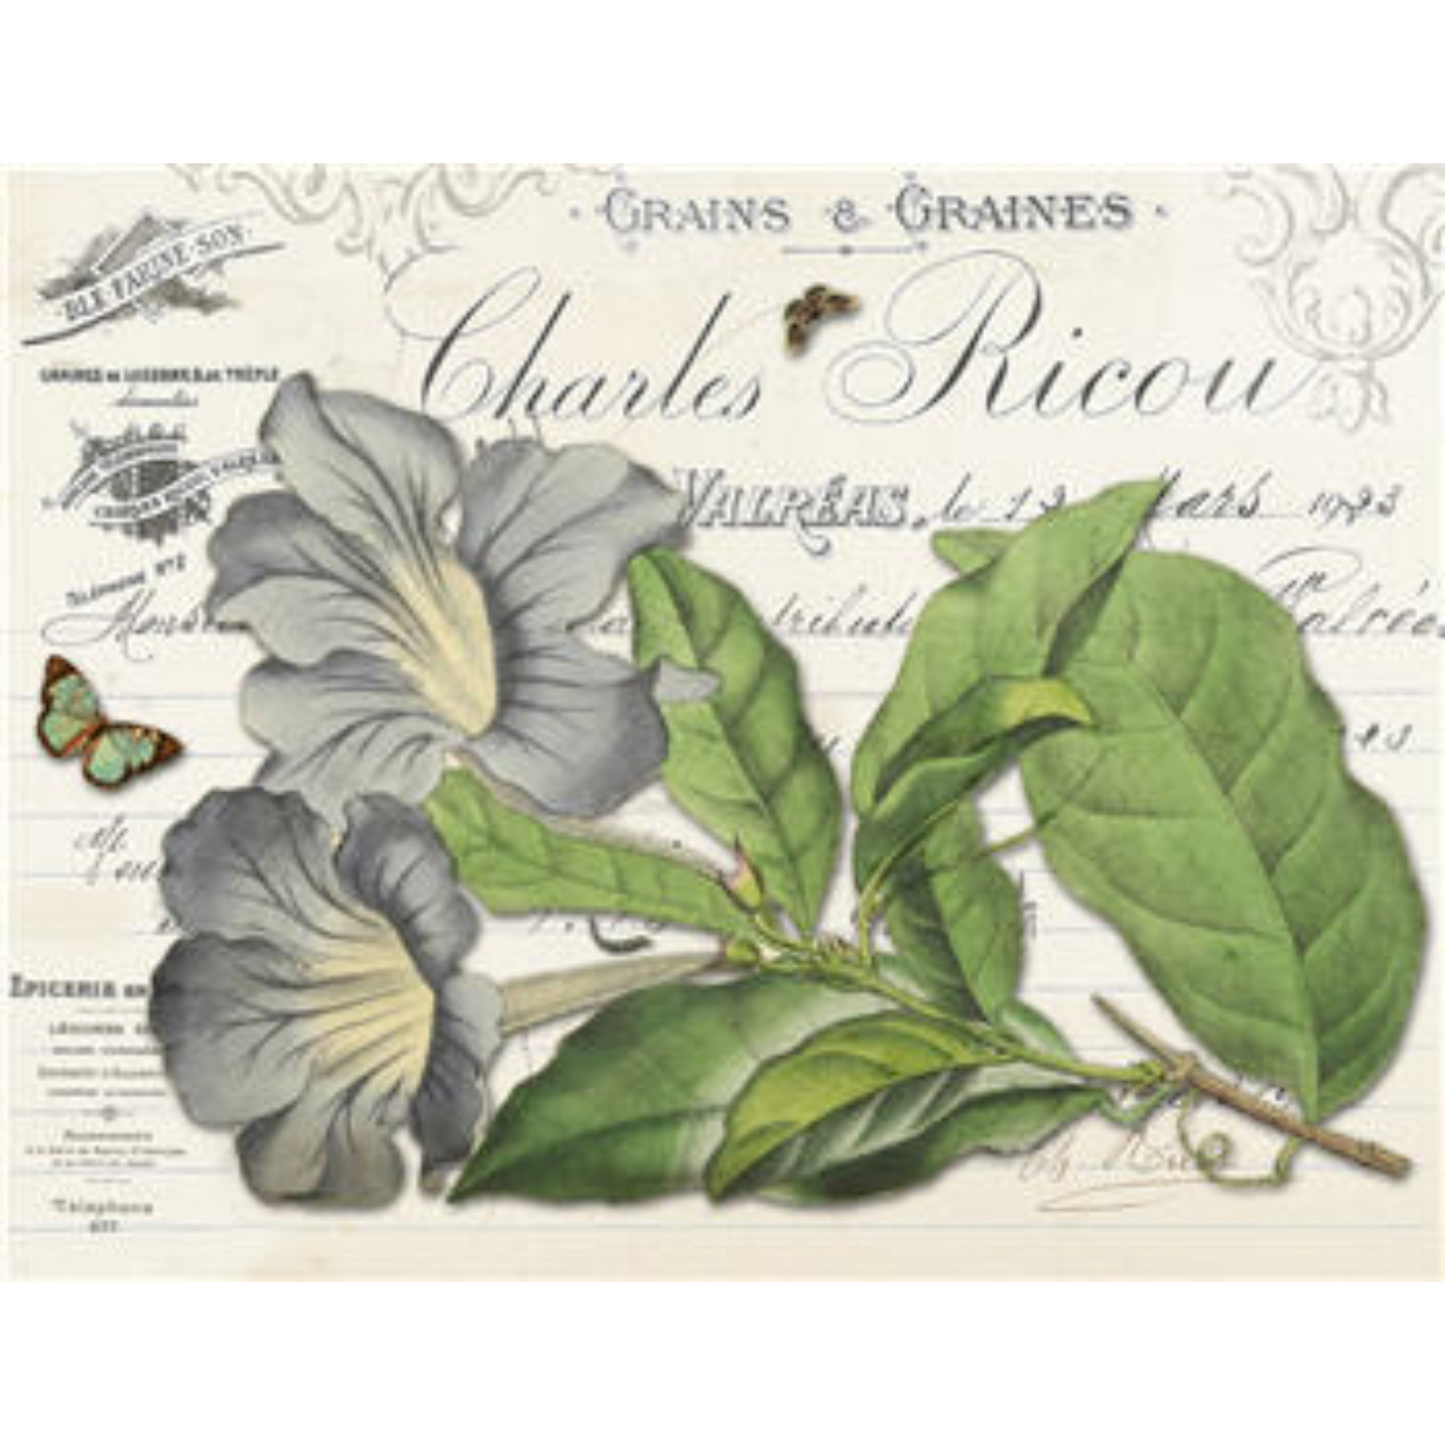 "Botanical 145" decoupage paper by Monahan Papers. Size 11" x 17" available at Milton's Daughter.